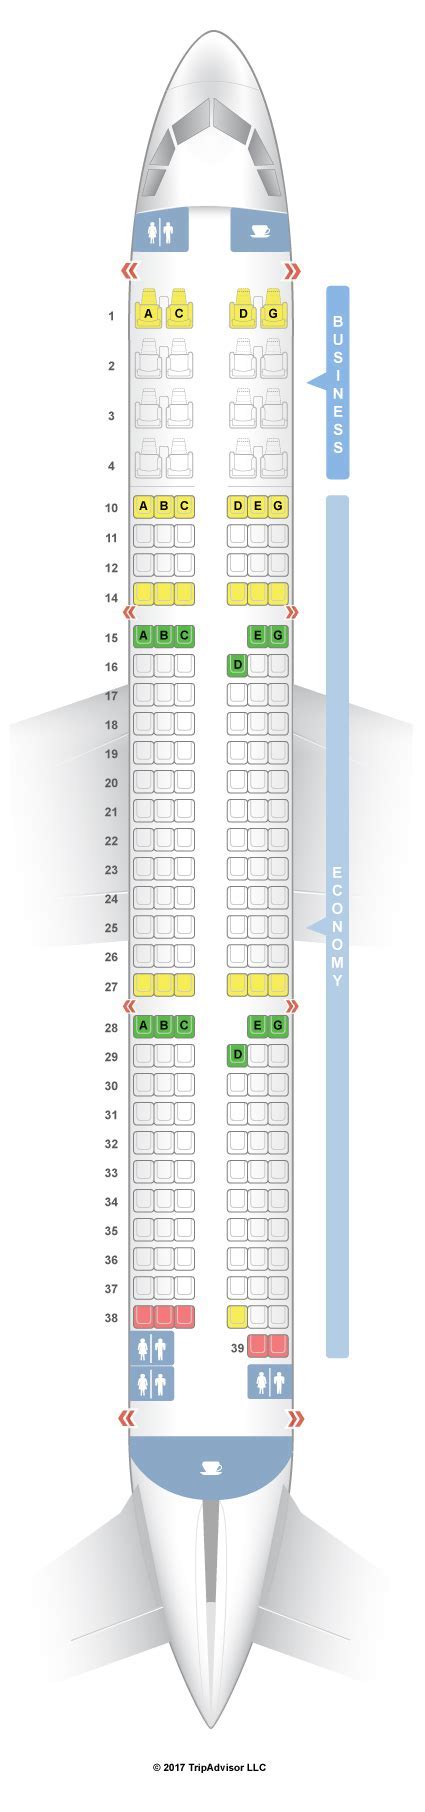 Airbus A350 900 Singapore Airlines Seat Map Airbus A350 900 Seat Map